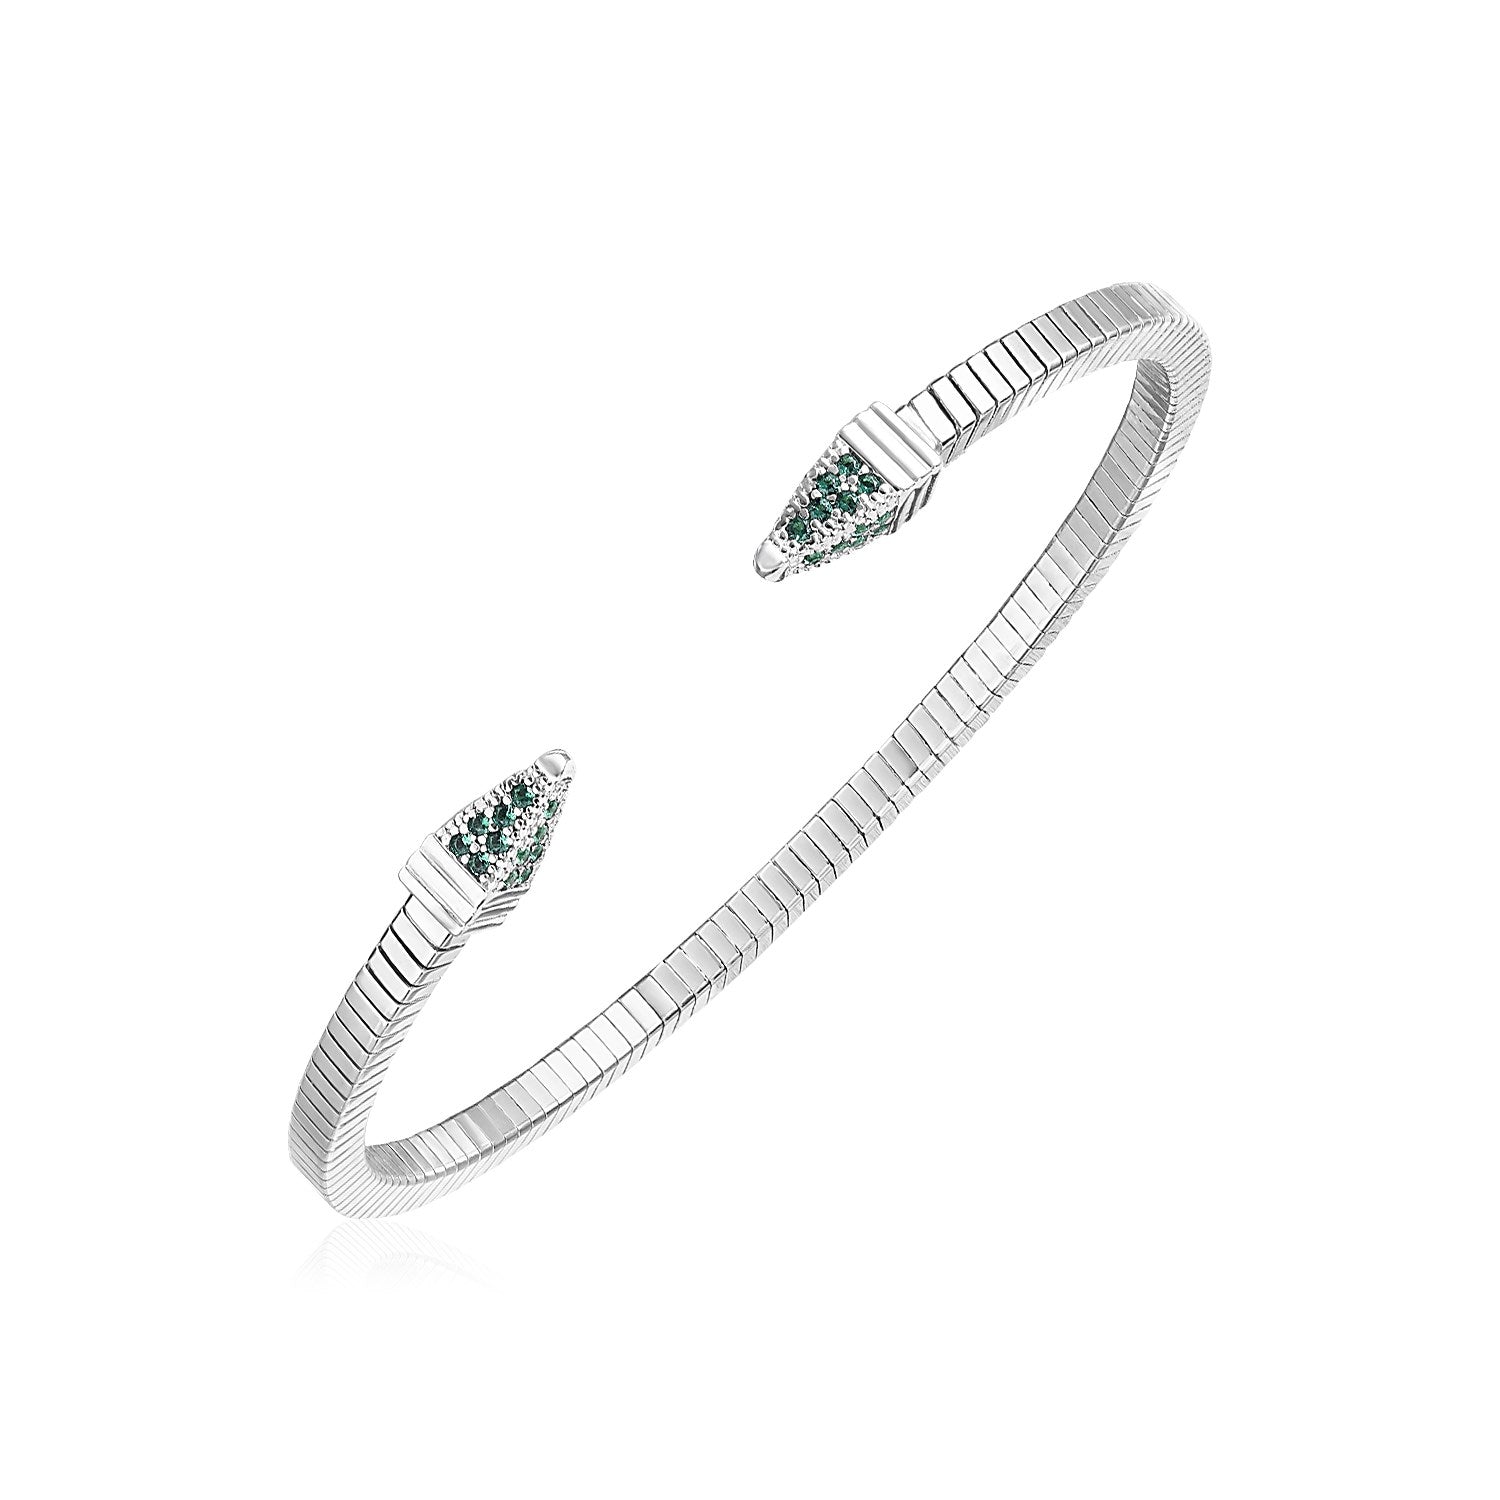 Sterling Silver Spike Cuff Bracelet with Forest Green Cubic Zirconias